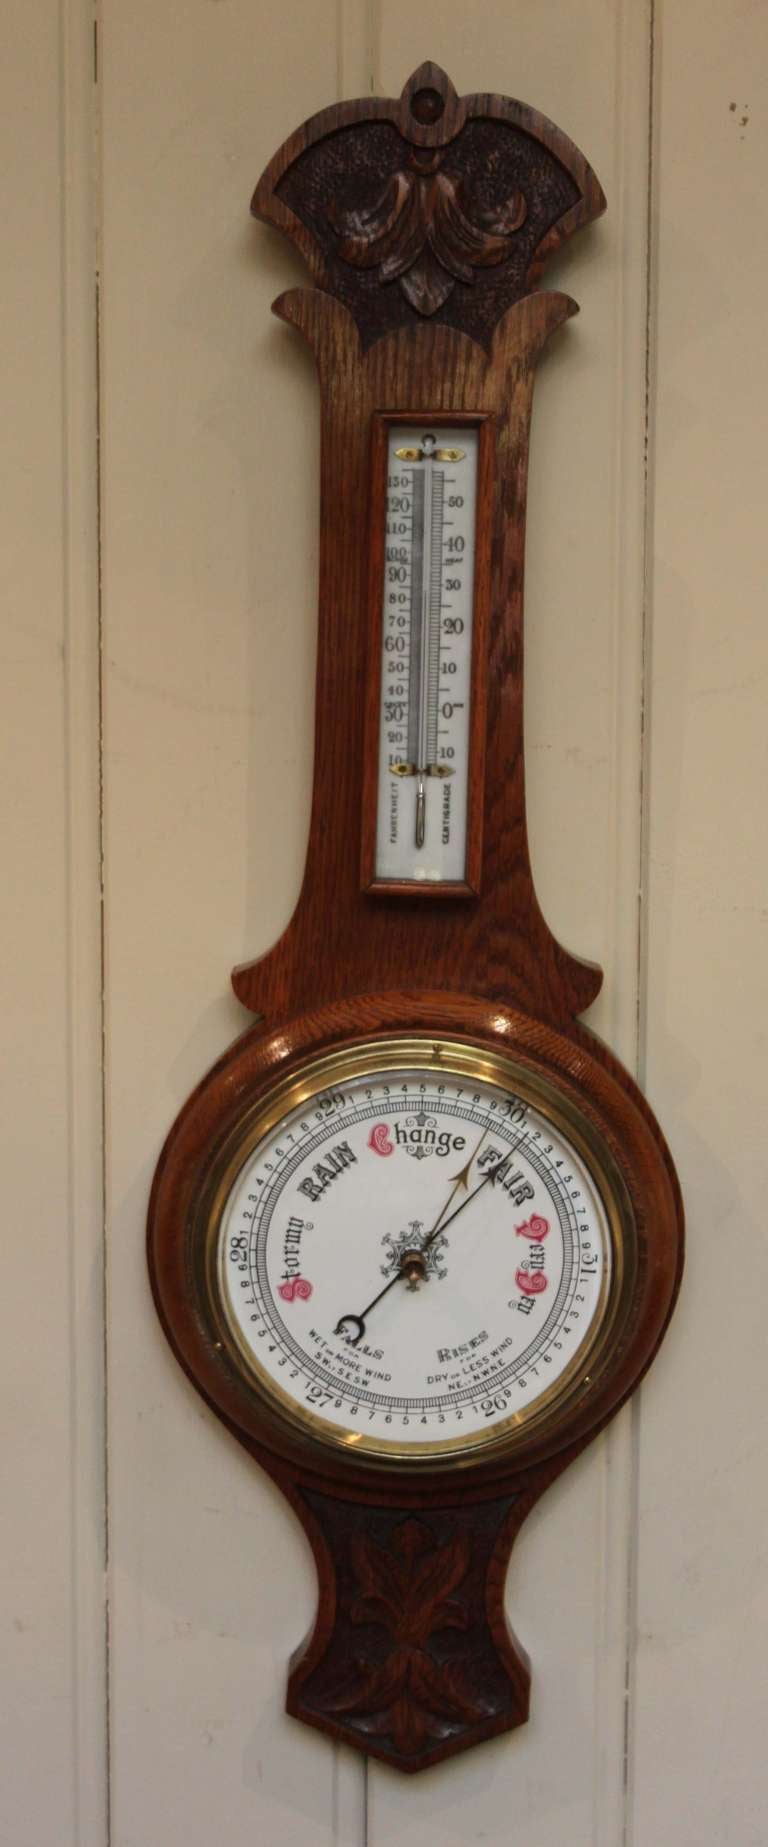 Solid golden oak aneroid banjo barometer having a carved top and bottom with a white dial dial and a mercury thermometer